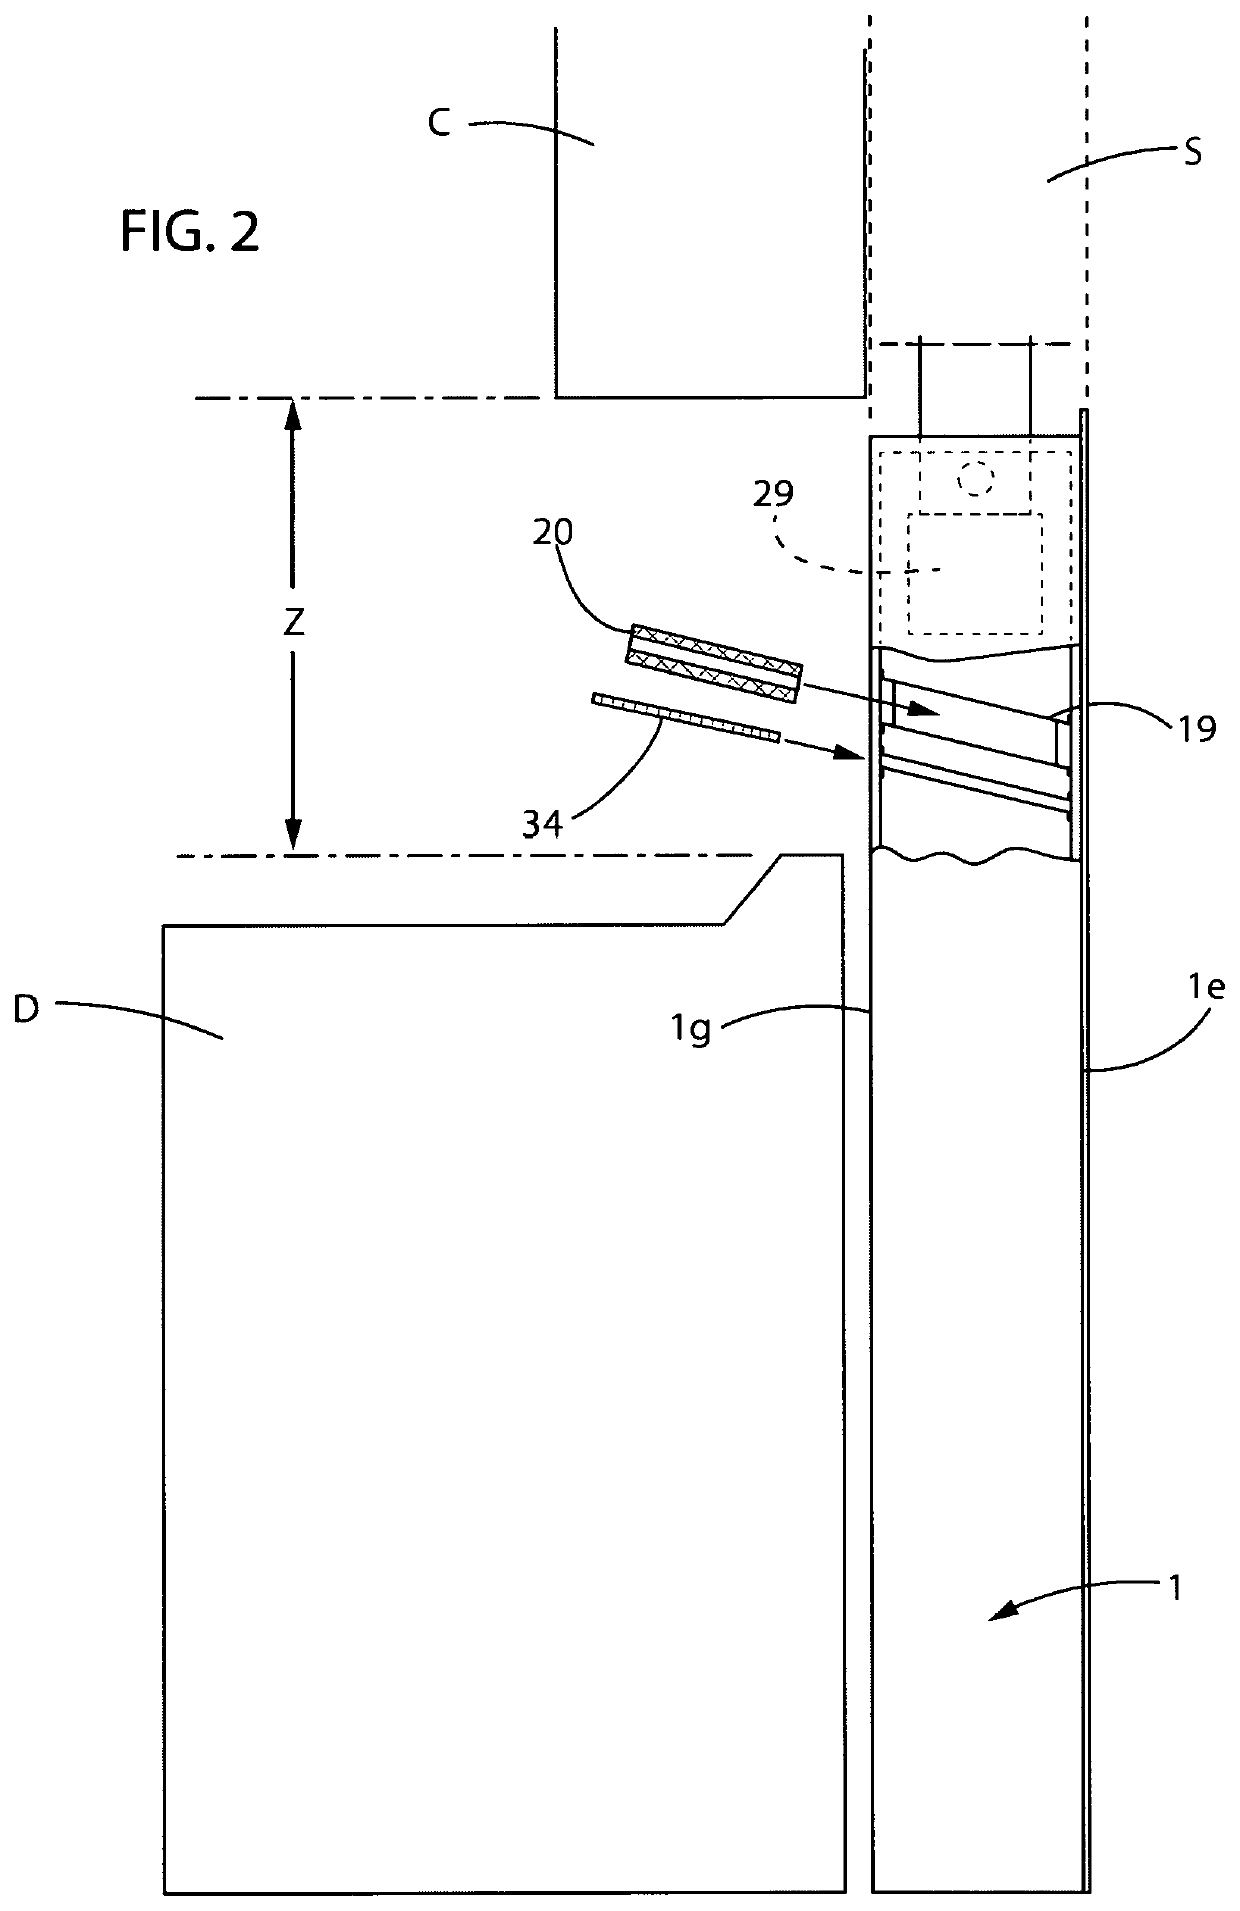 Condensate and lint separator within a gaseous fluid exhaust system of a clothes dryer